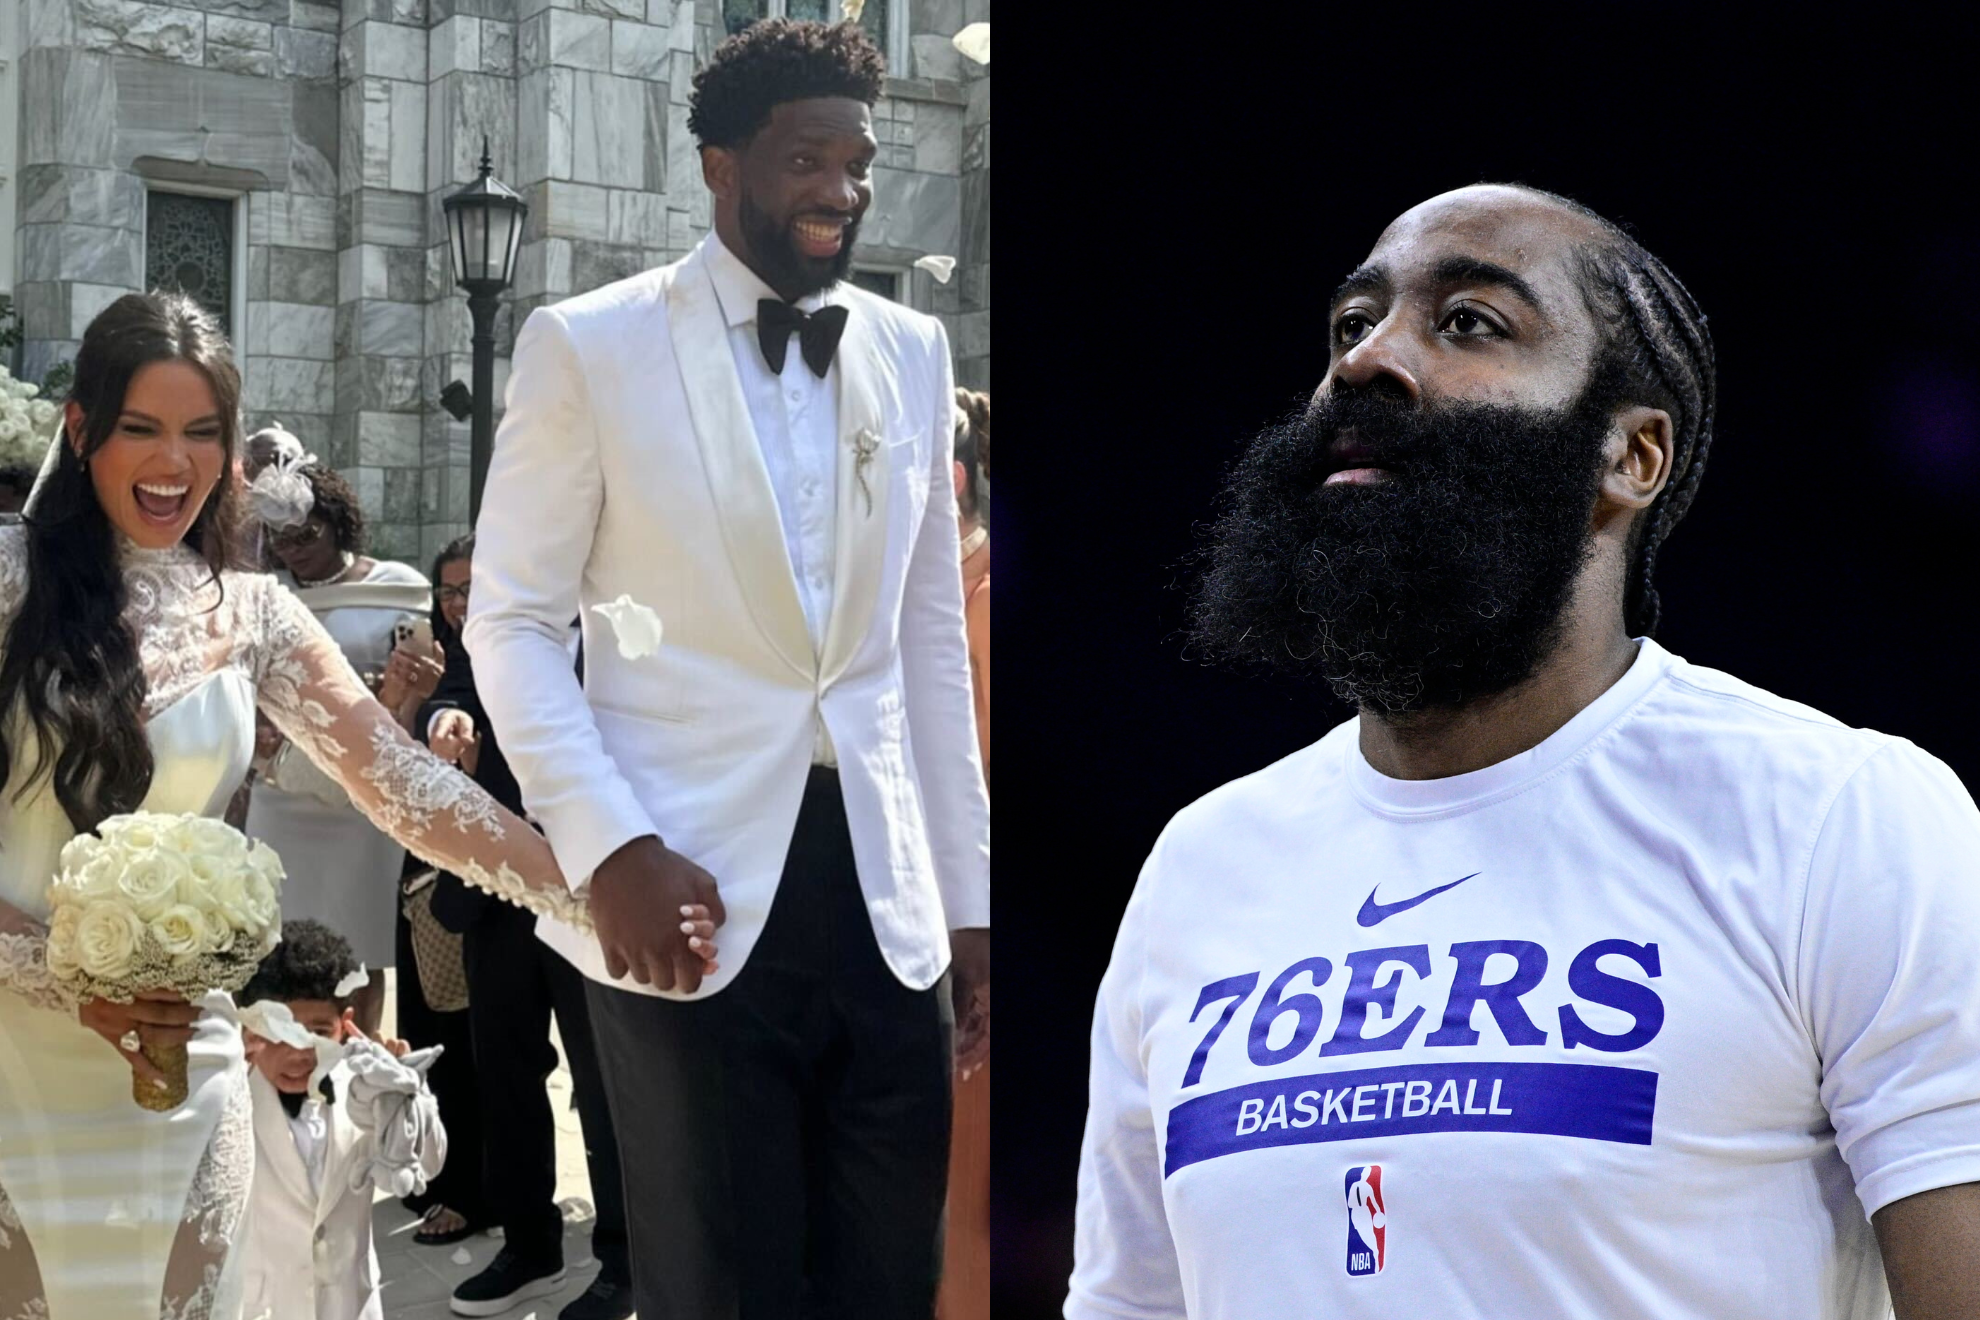 While Joel Embiid got married, James Hardens whereabouts were unknown.